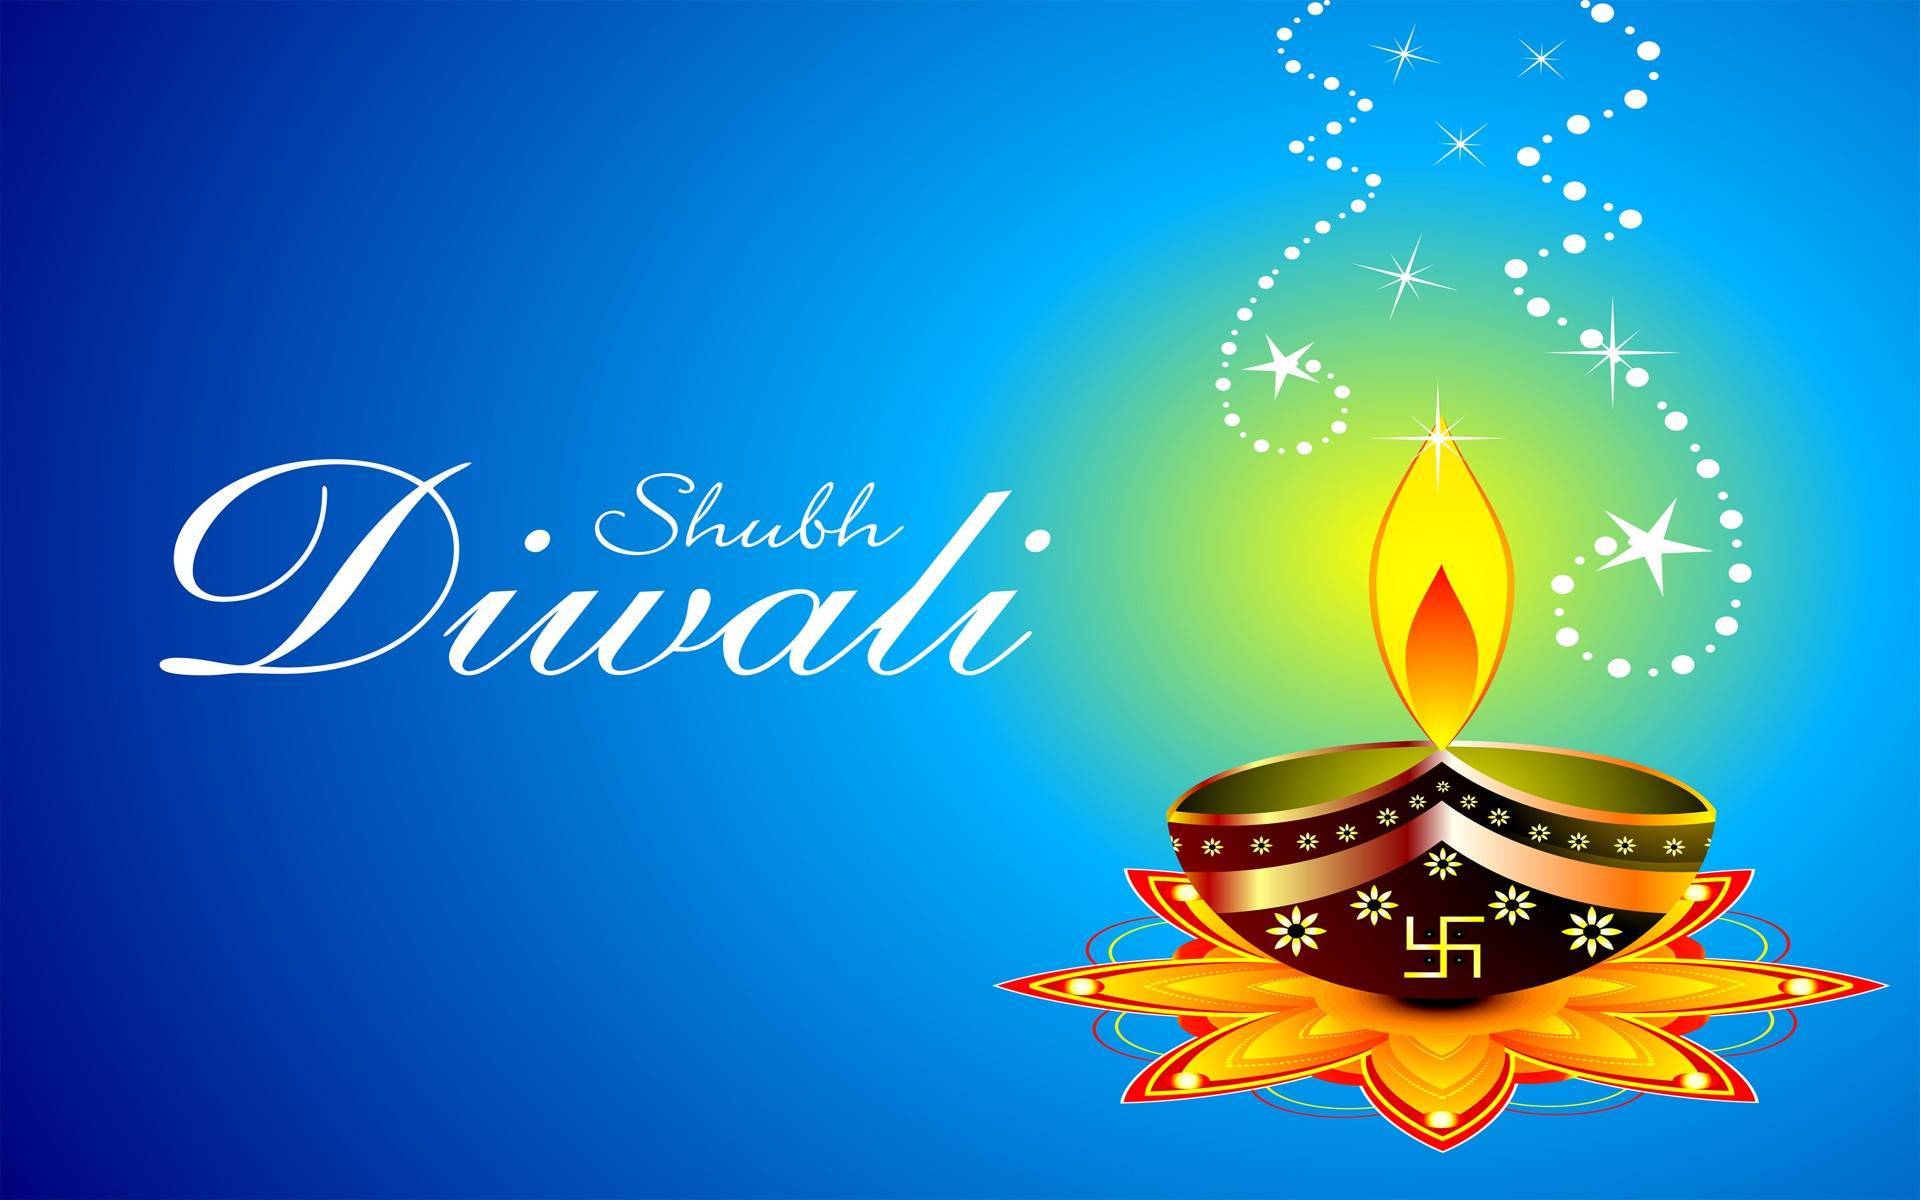 Happy Diwali Hd Images, Wallpapers, Picture & Photos - Download